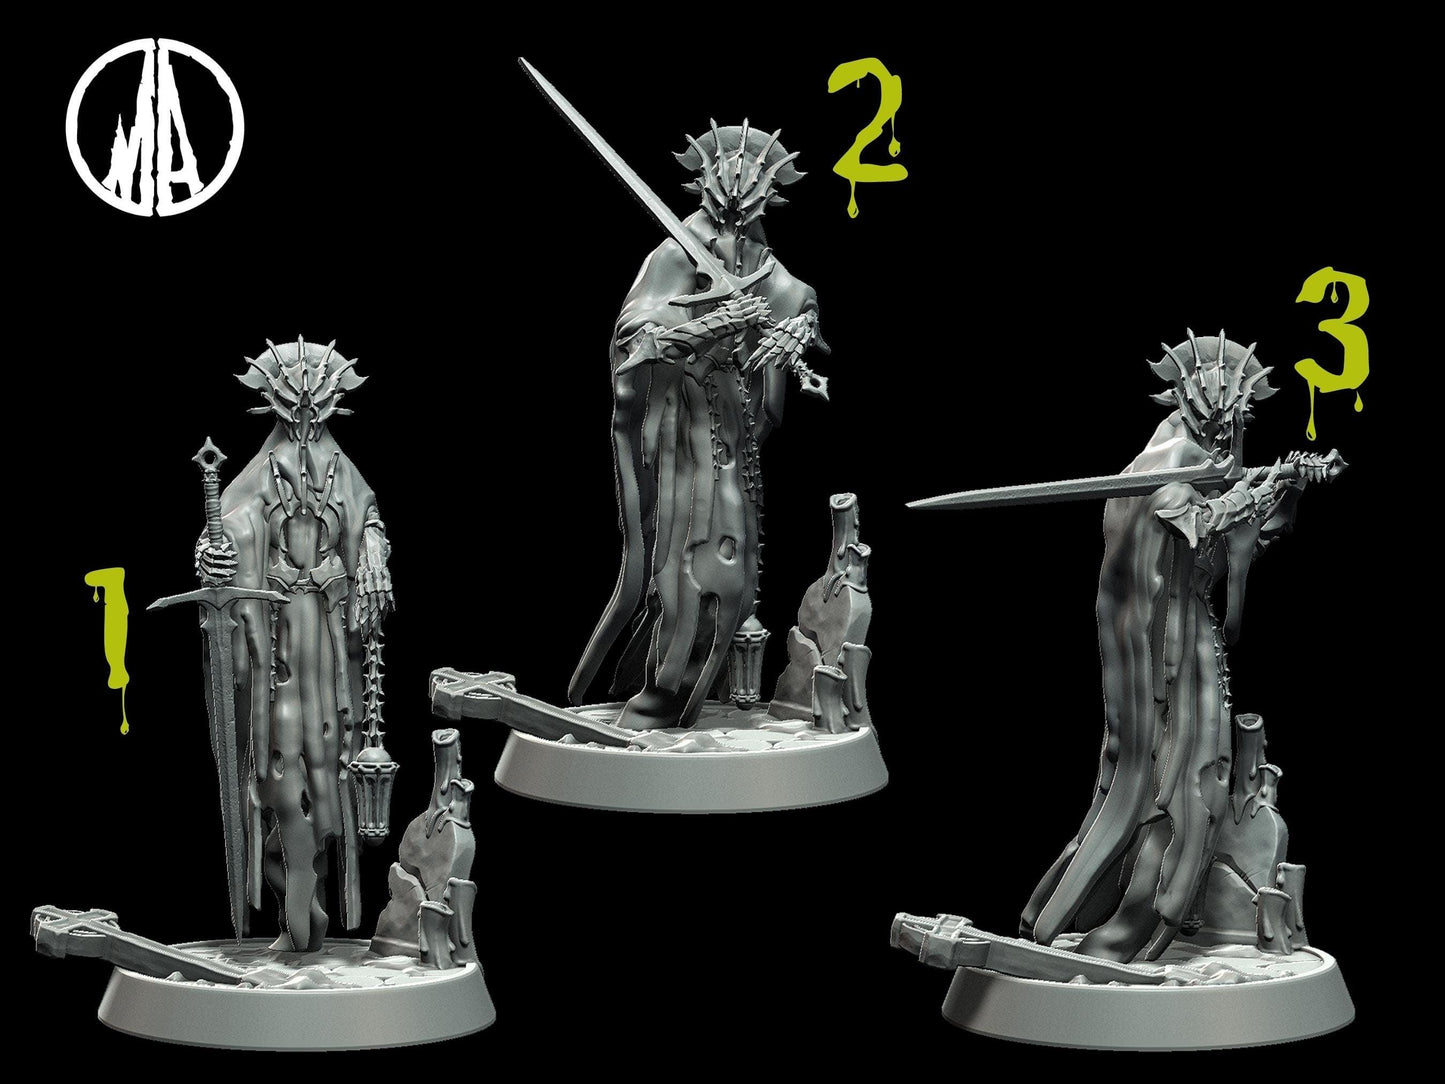 Restless Shadow Miniature - 3 Poses - 28mm scale Tabletop gaming DnD Miniature Dungeons and Dragons dnd 5e - Plague Miniatures shop for DnD Miniatures